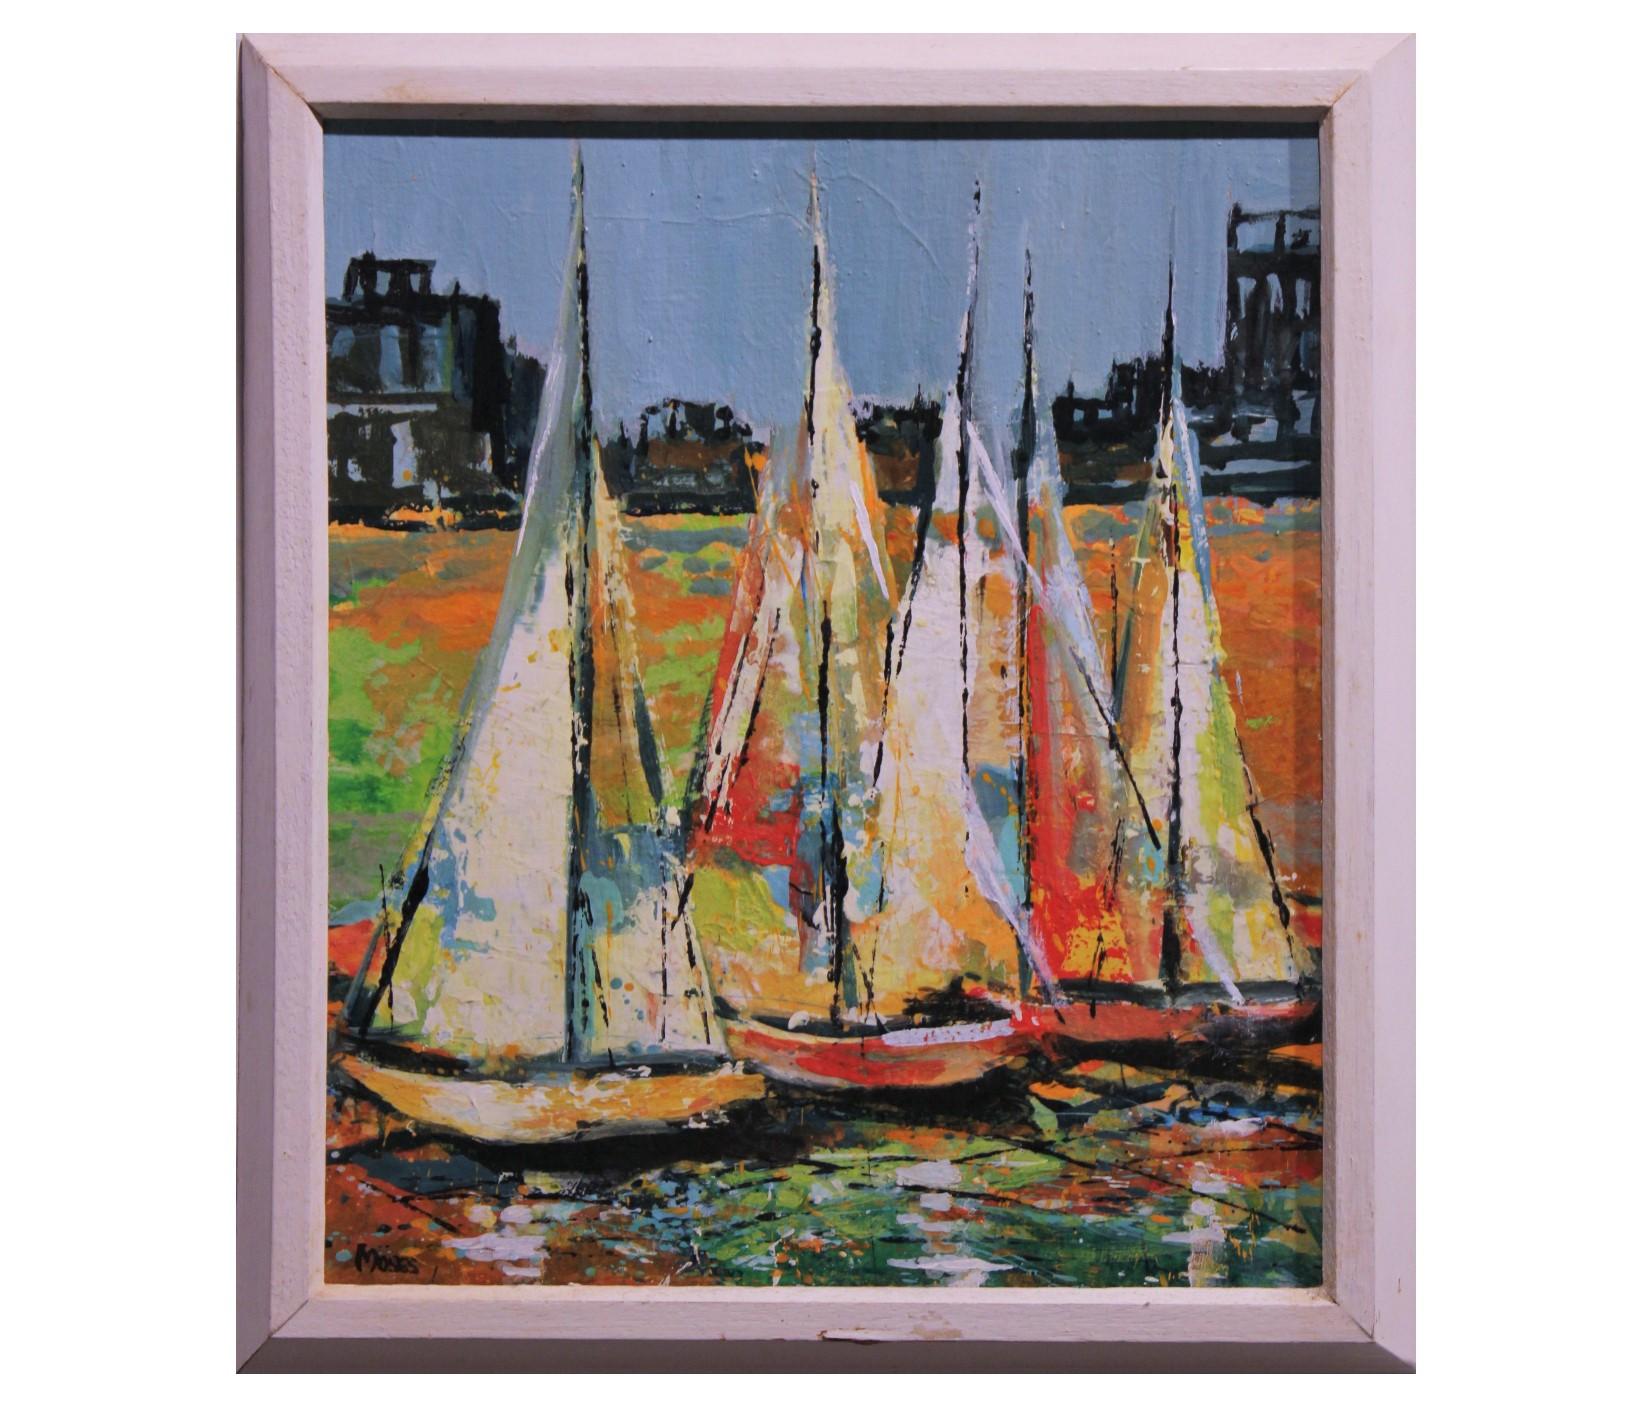 Gladys Moses Landscape Painting - Colorful Sea Boats in an Impressionist Style